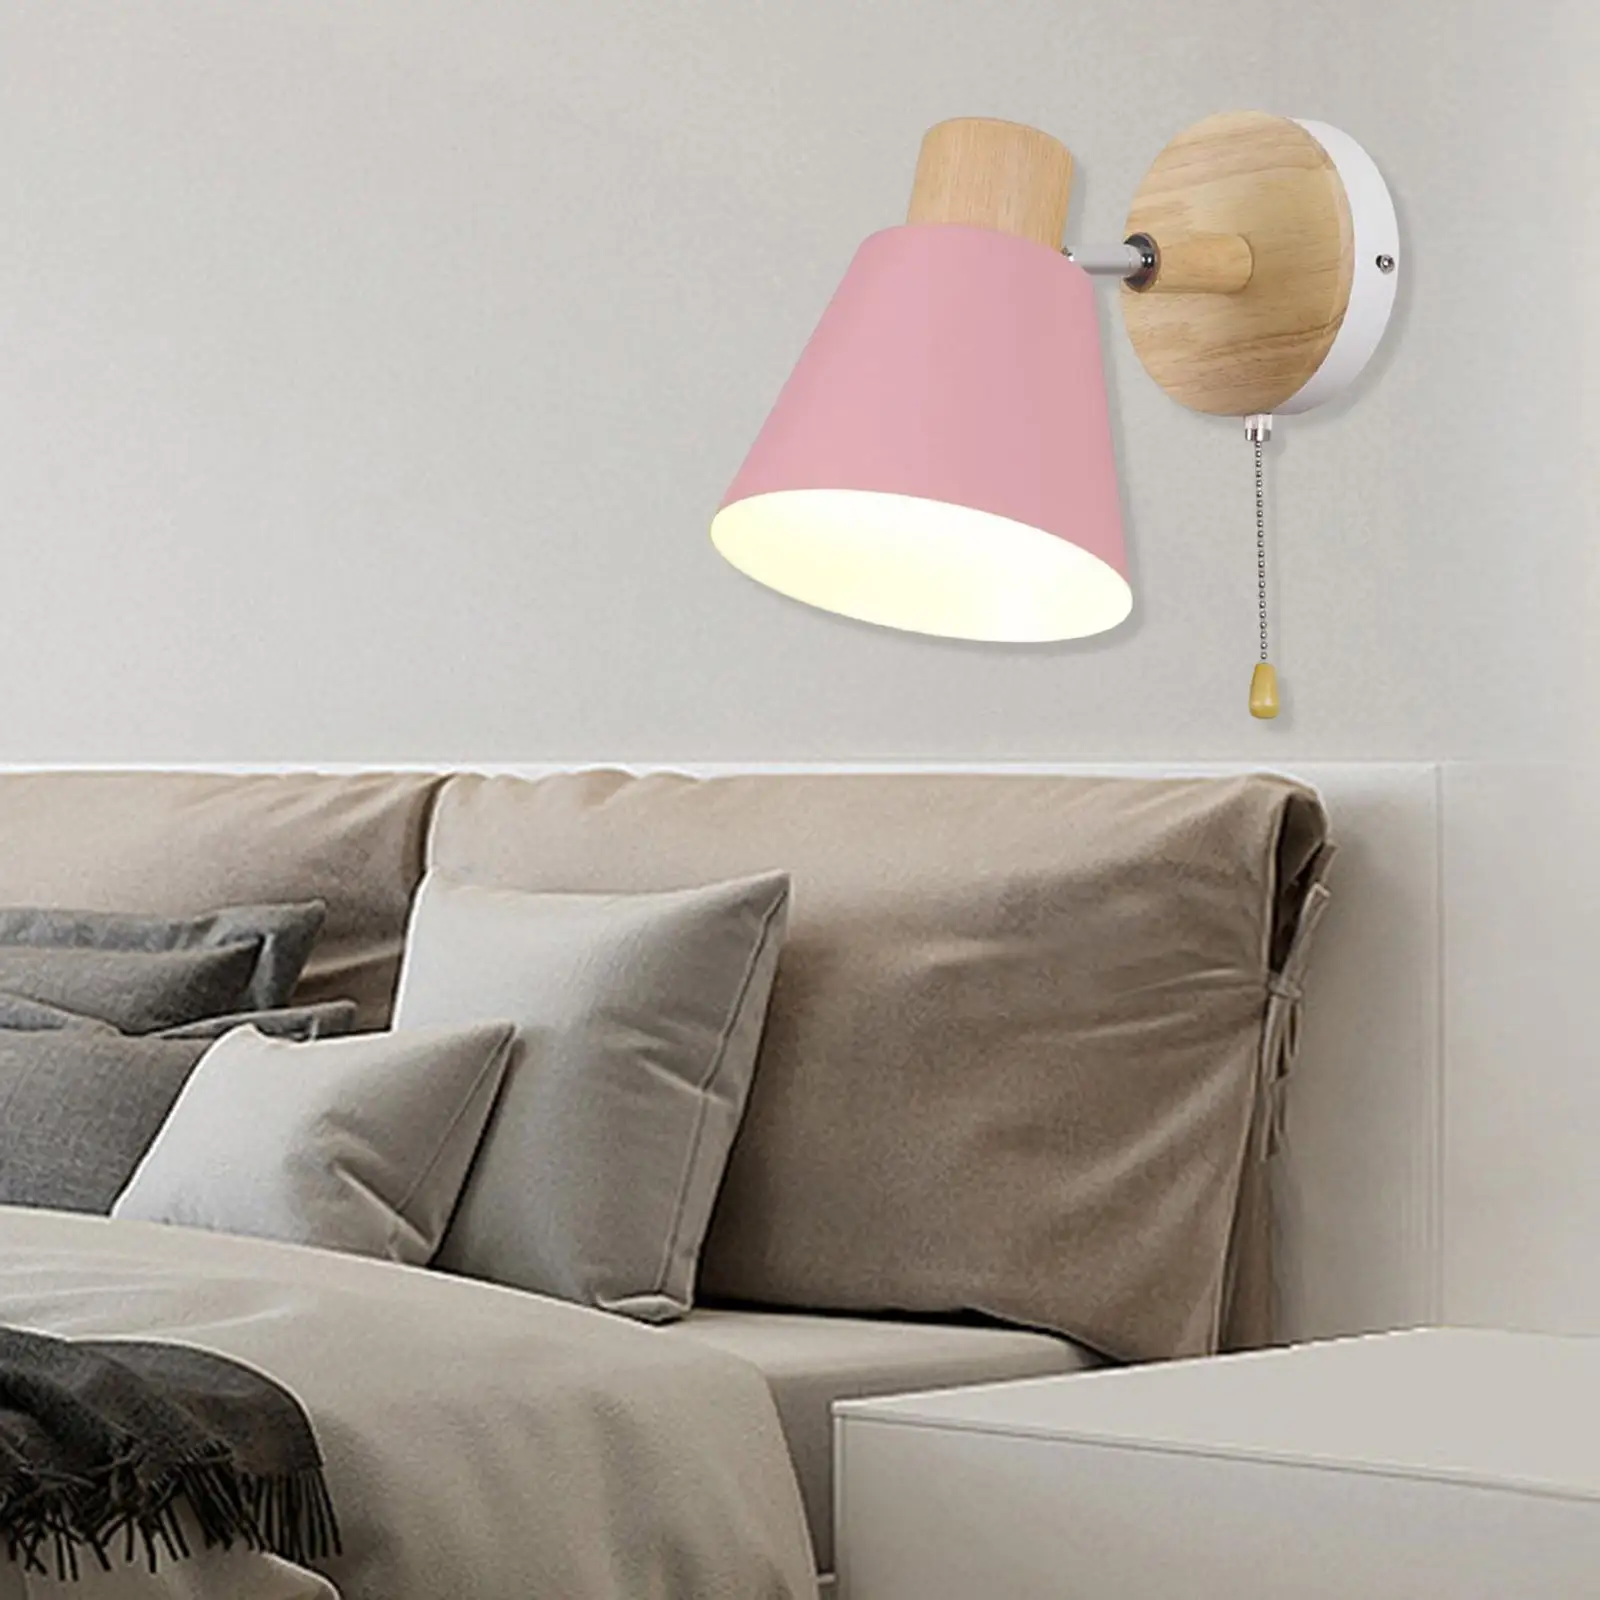 Modern Minimalist Wall Lamp Sconce Light with Pull Cord Switch Adjustable Lighting Fixture for Living Room Home Decoration